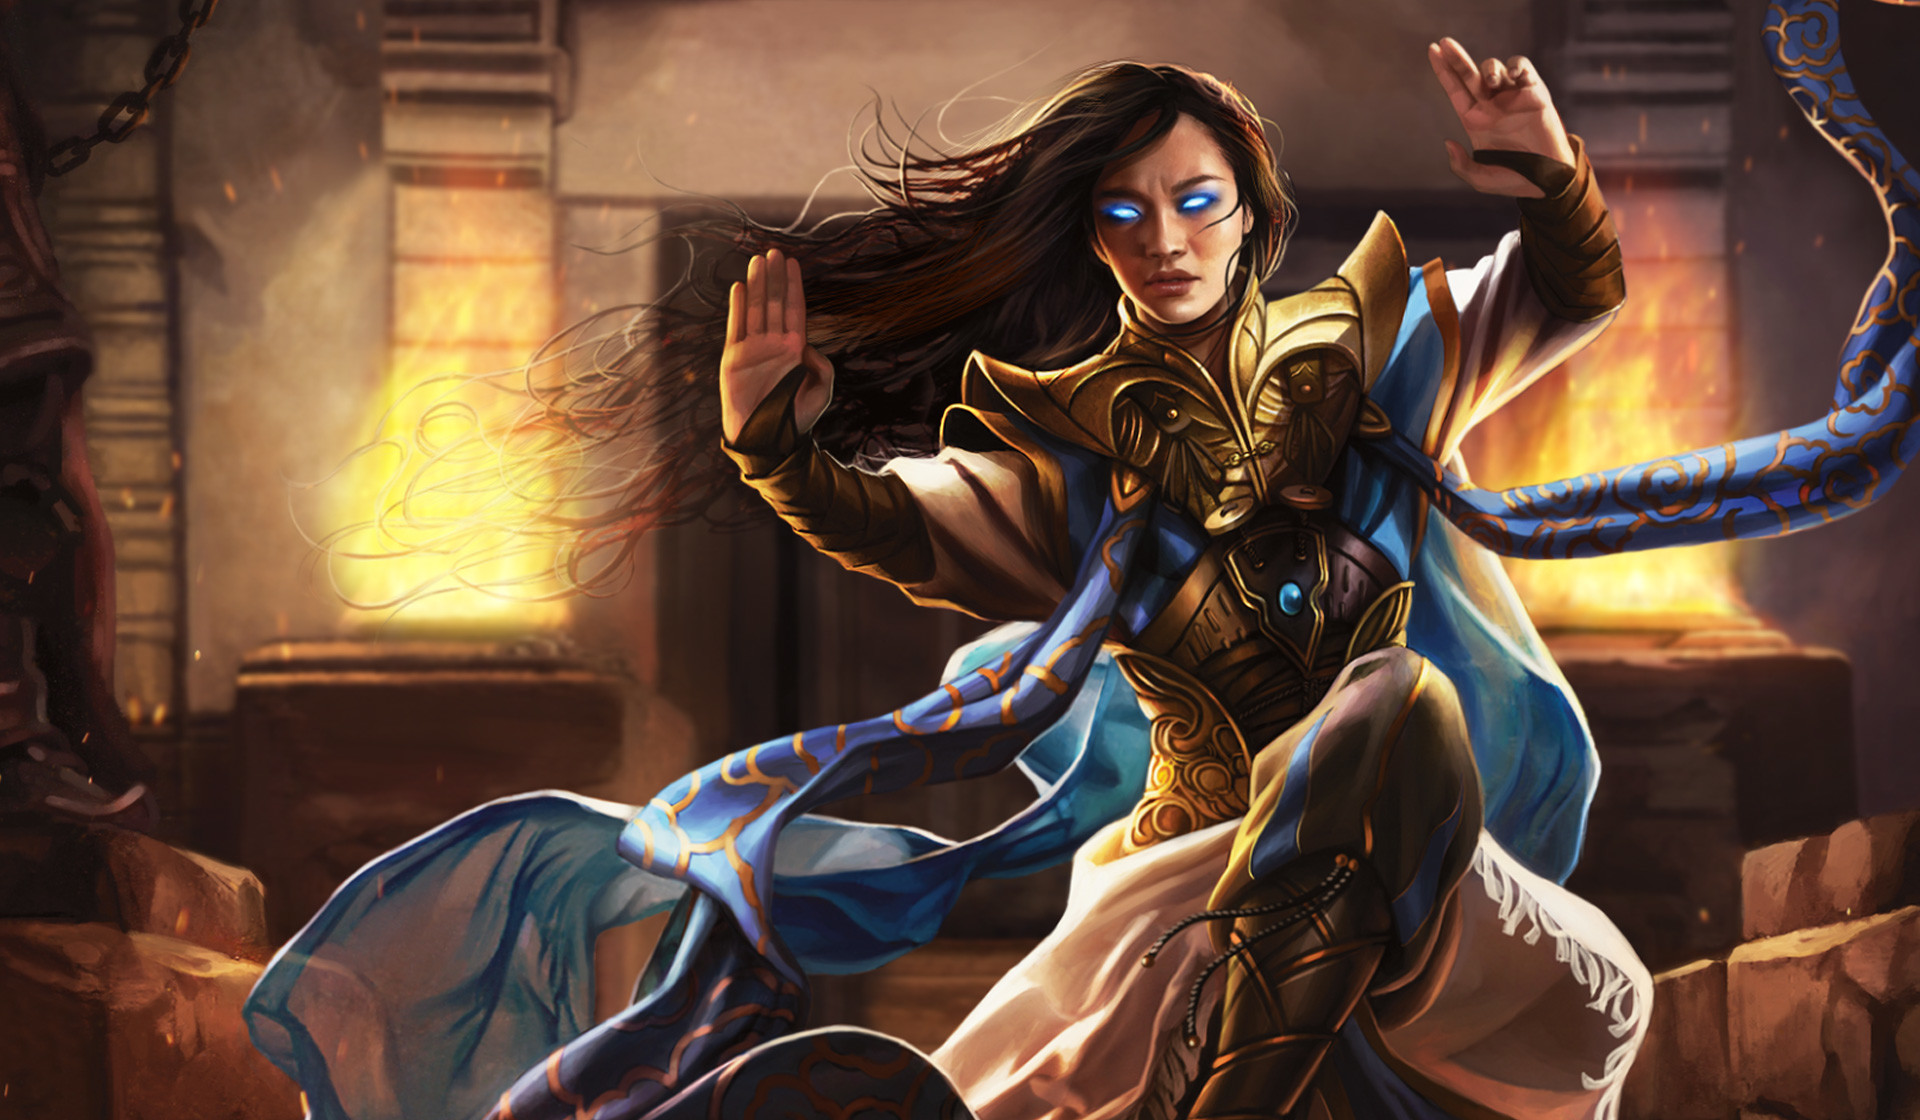 Magic the Gathering Planeswalkers Wallpaper (92+ images)
 Magic The Gathering Wallpaper Planeswalker